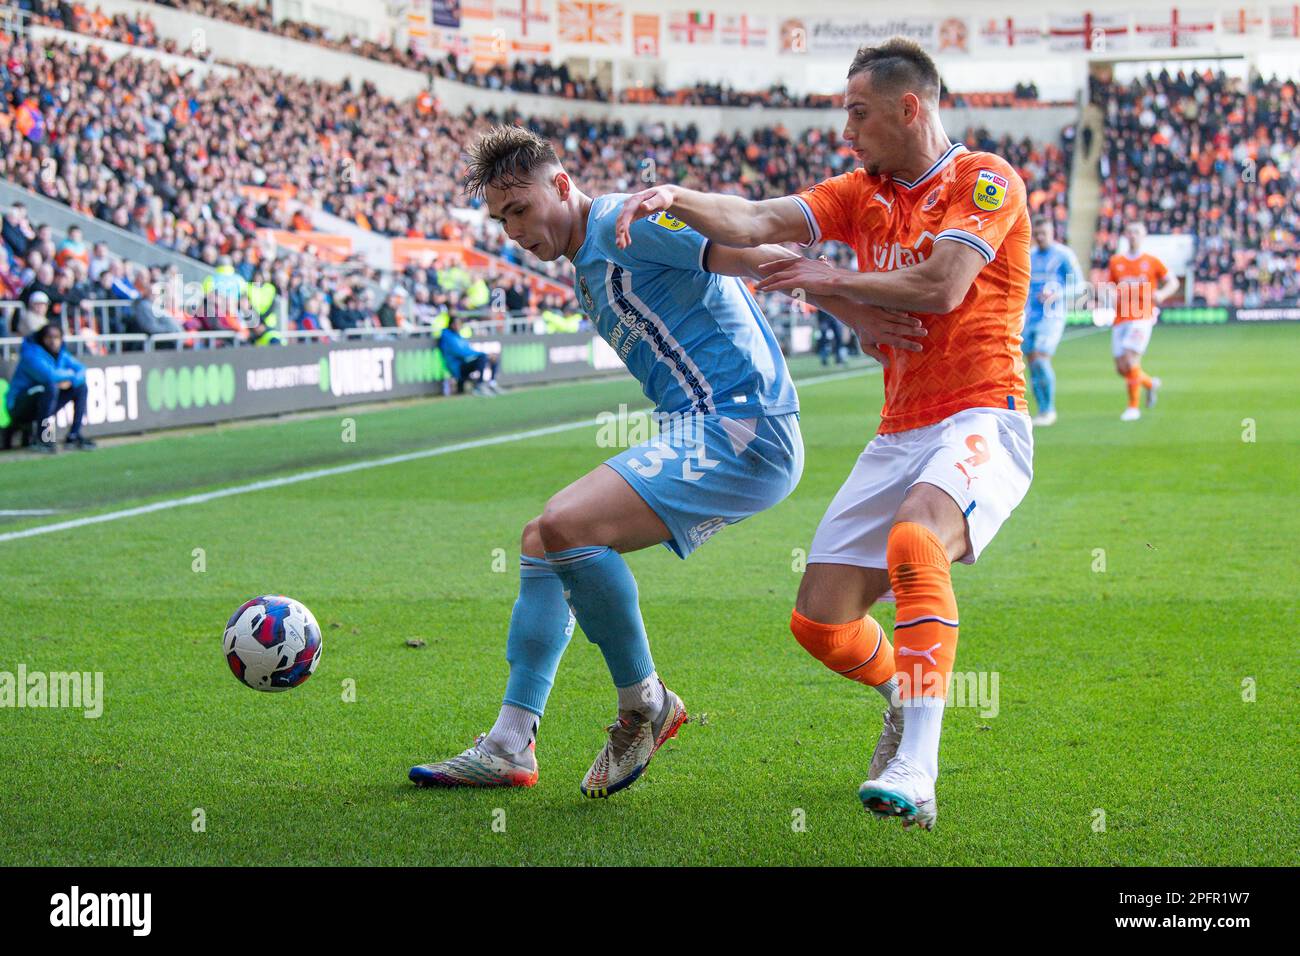 Jerry Yates #9 of Blackpool and battles for the ball with Callum Doyle #3 of Coventry City during the Sky Bet Championship match Blackpool vs Coventry City at Bloomfield Road, Blackpool, United Kingdom, 18th March 2023  (Photo by Craig Thomas/News Images) Stock Photo